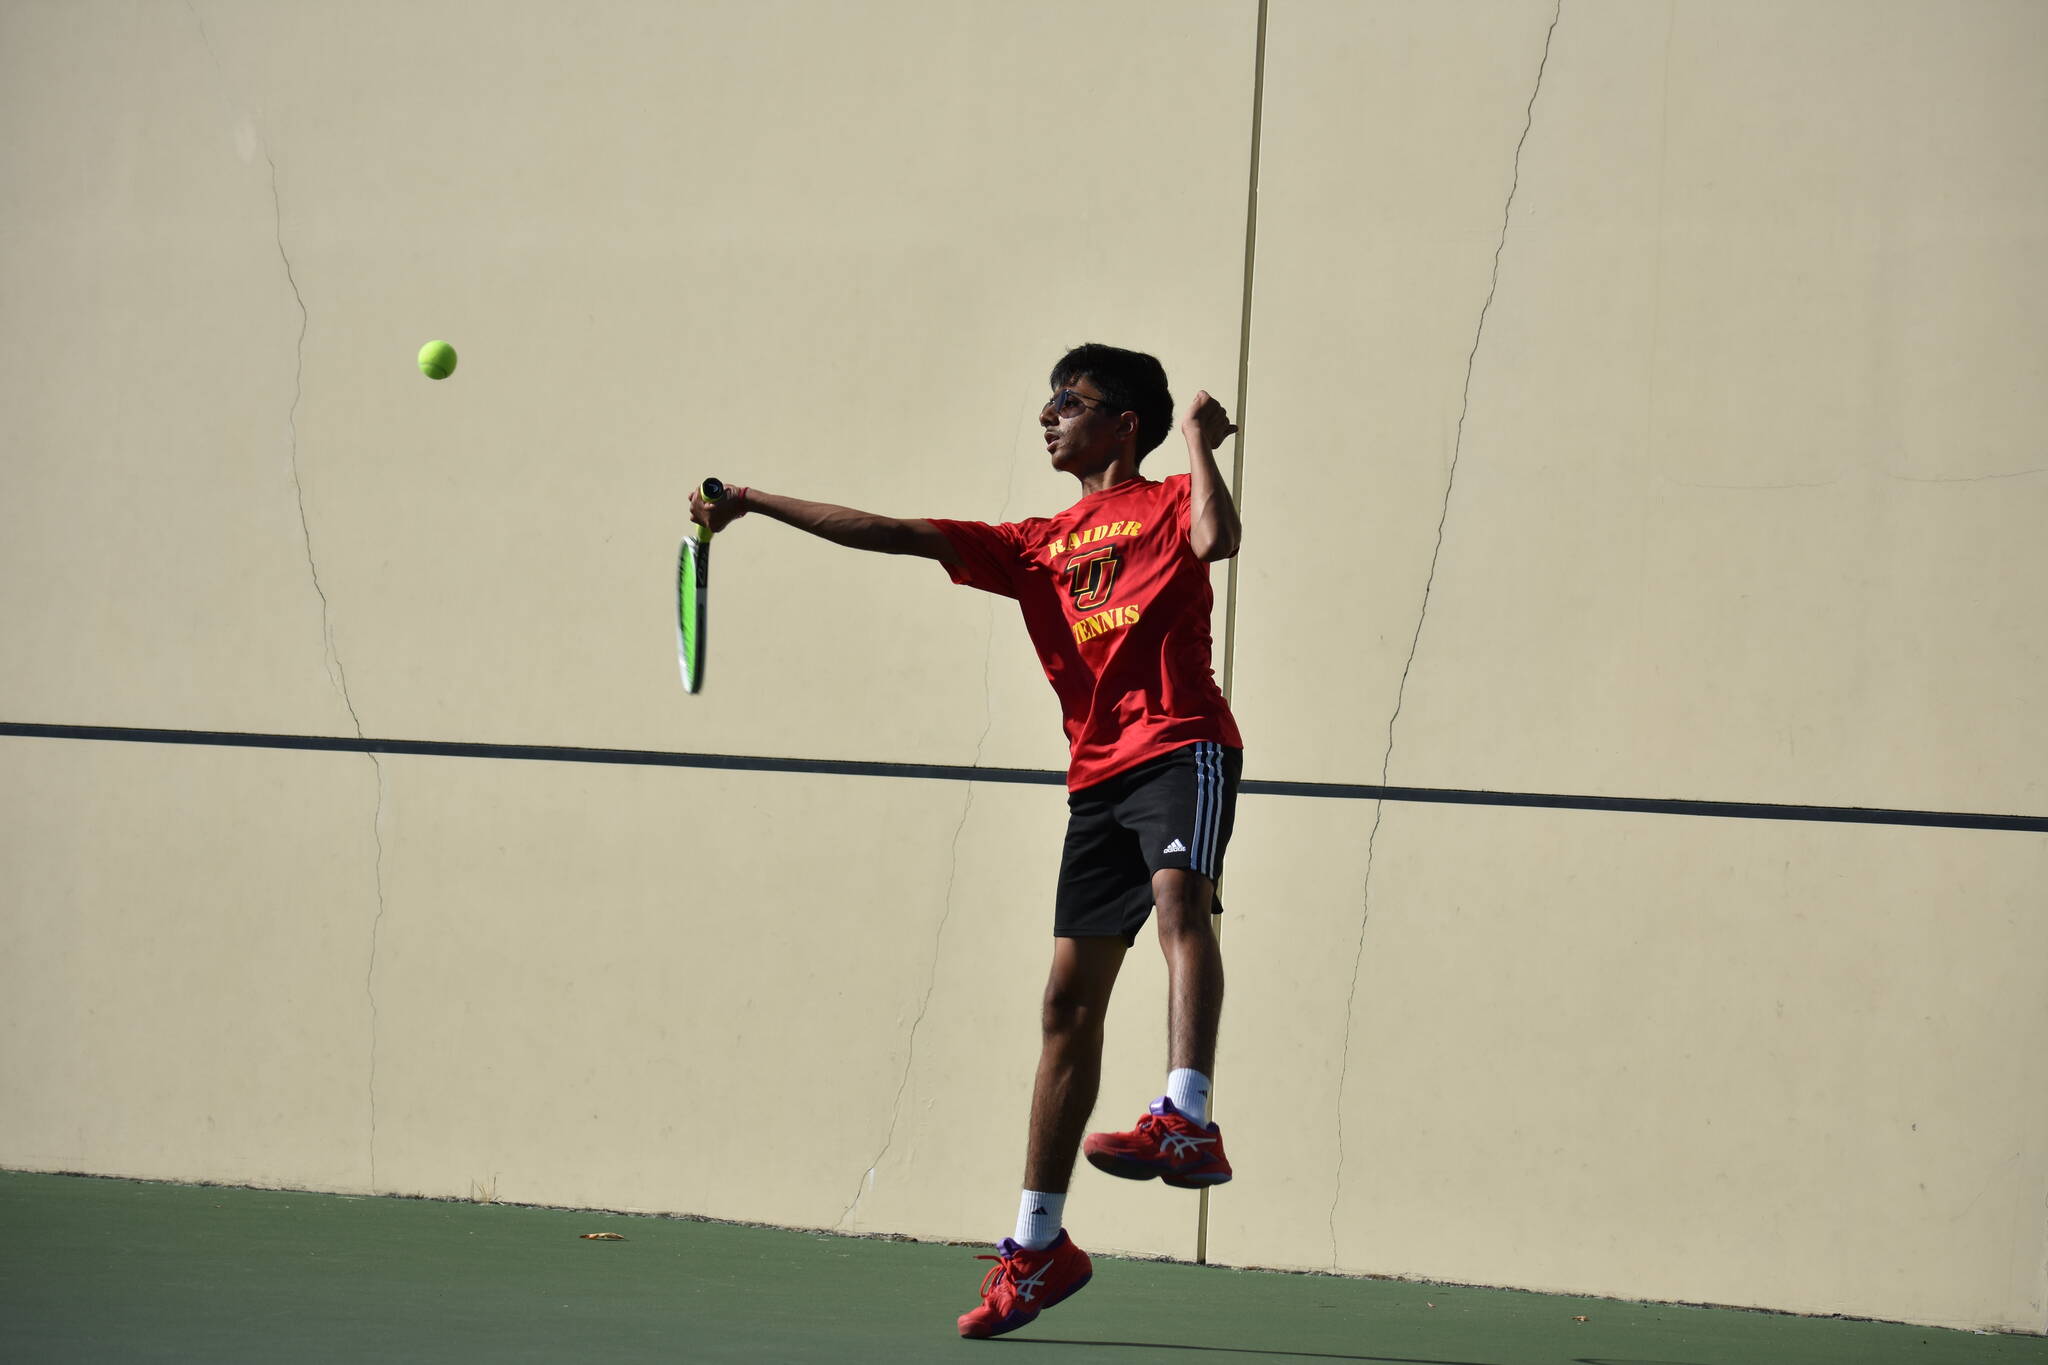 Sophomore Sanchit Sharma making an athletic play in his match. Ben Ray / The Mirror